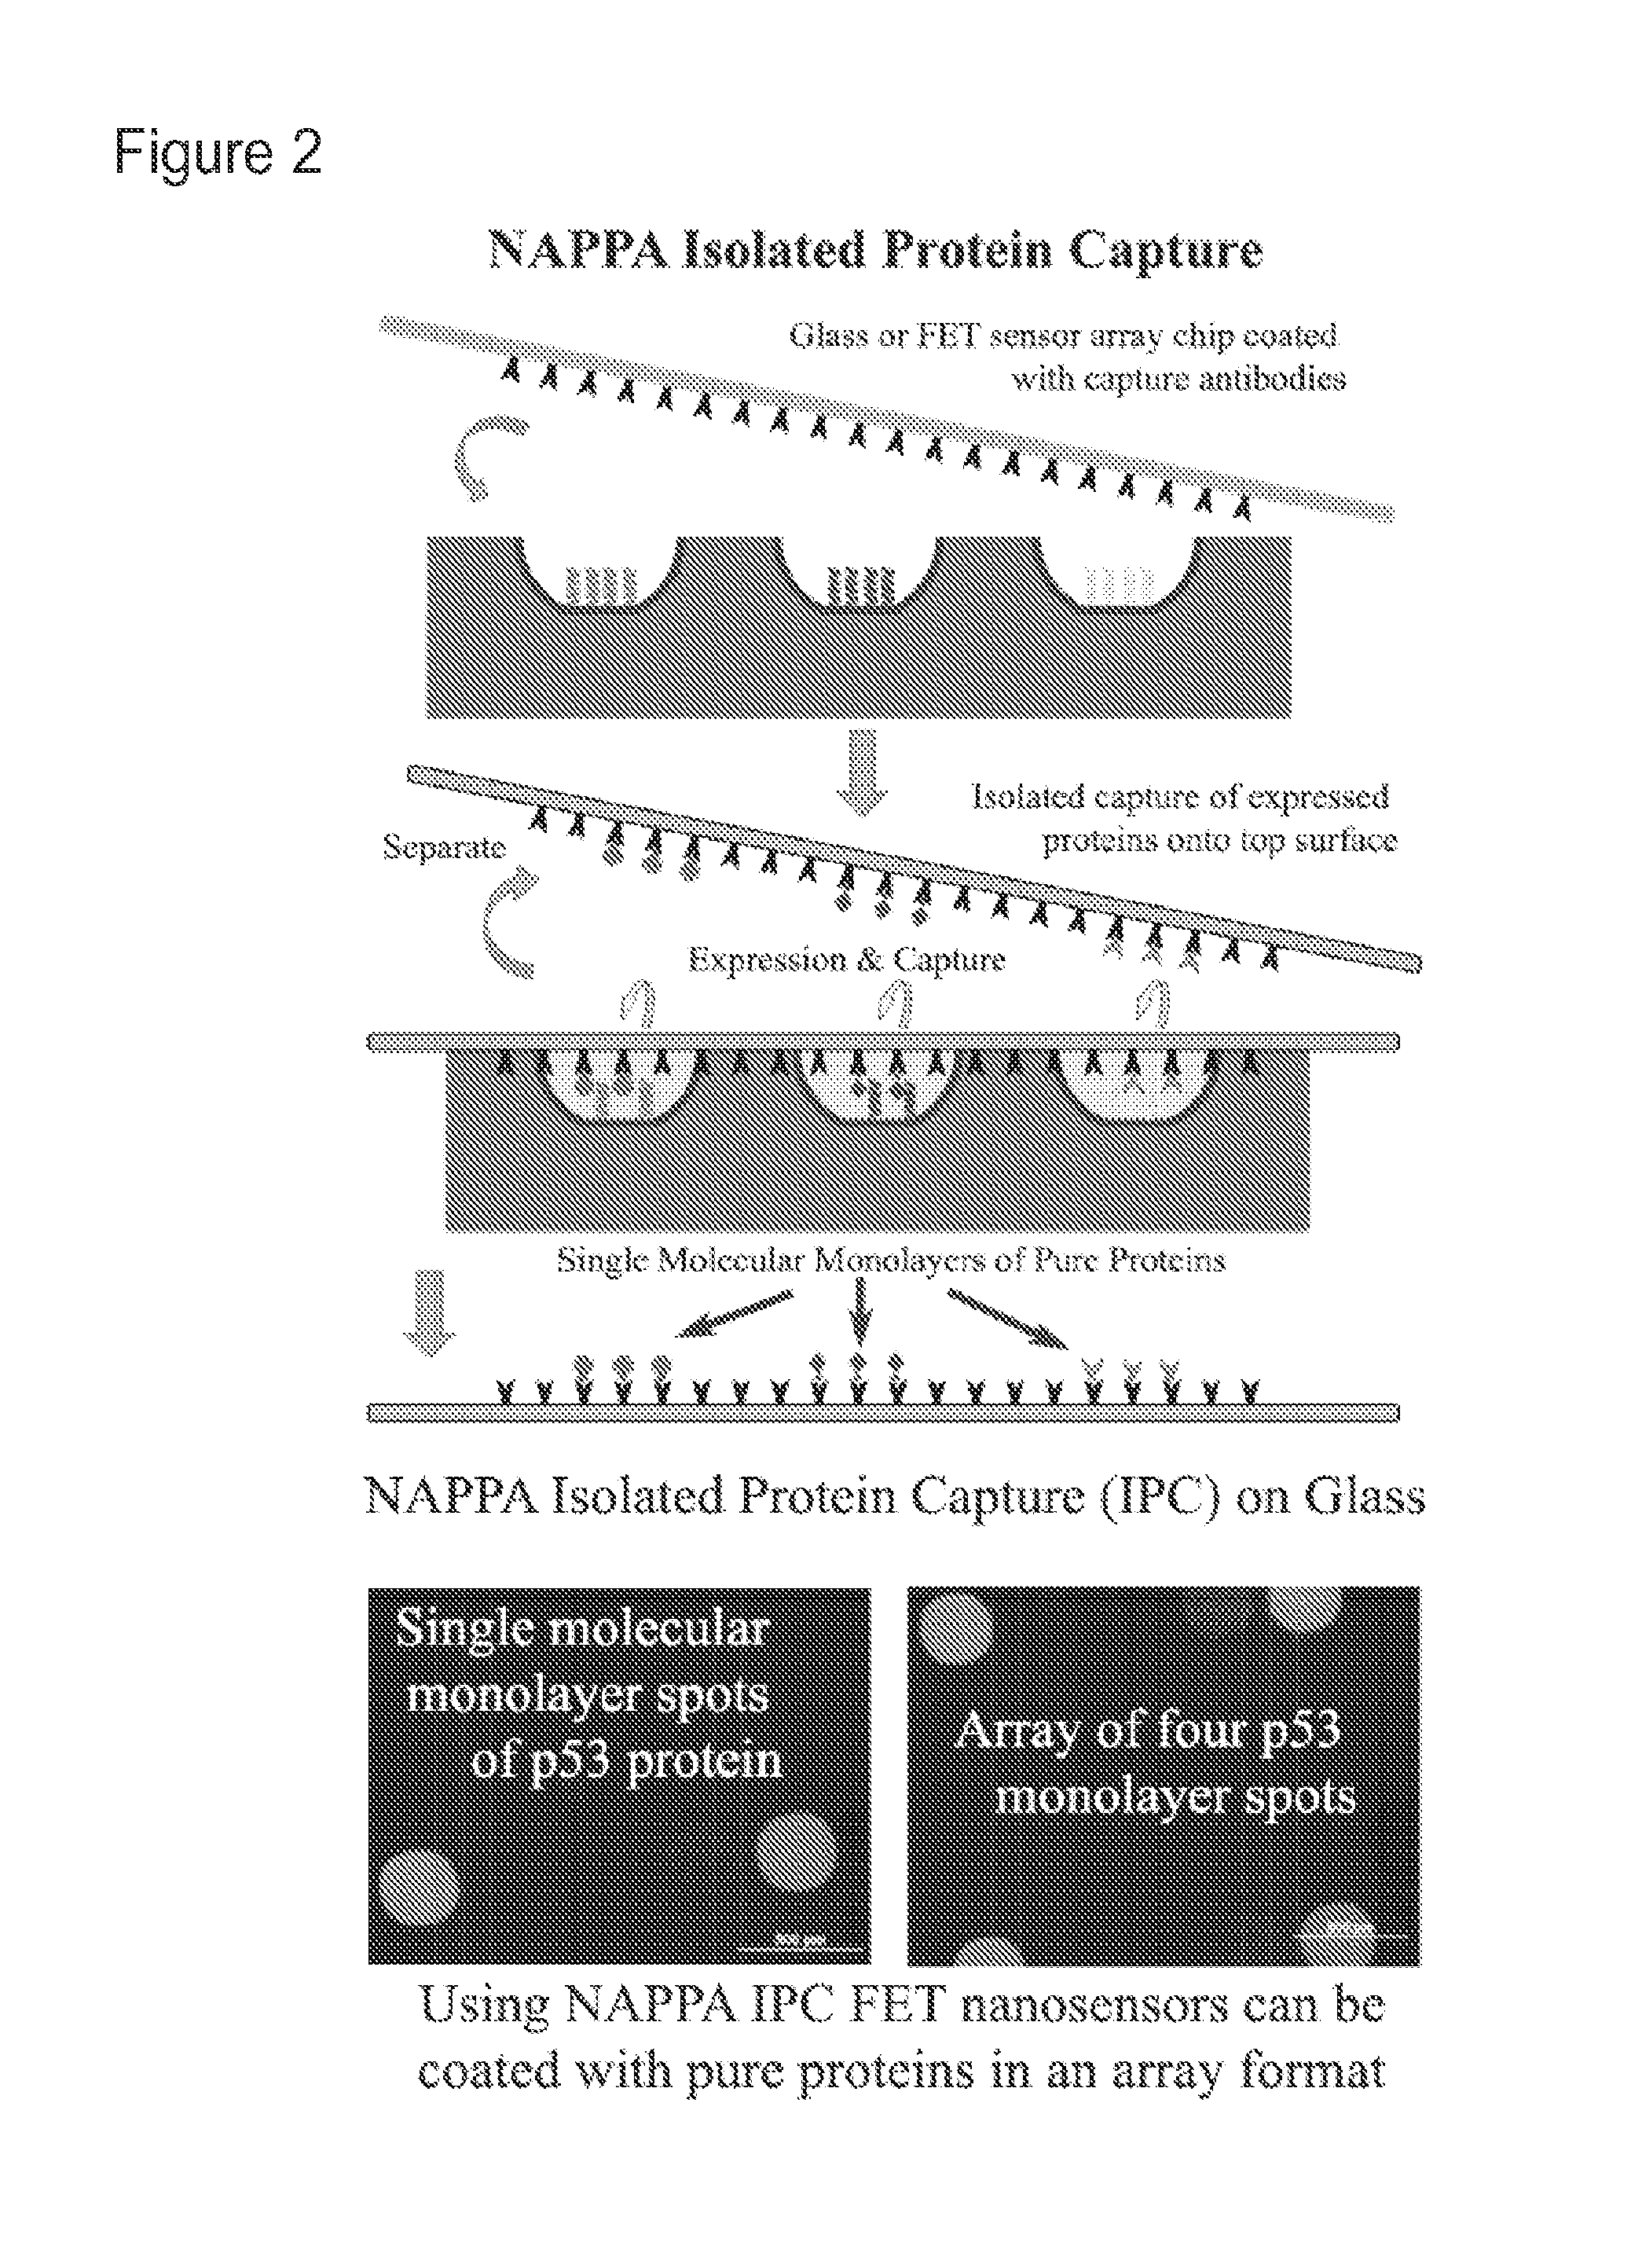 Biosensor microarray compositions and methods